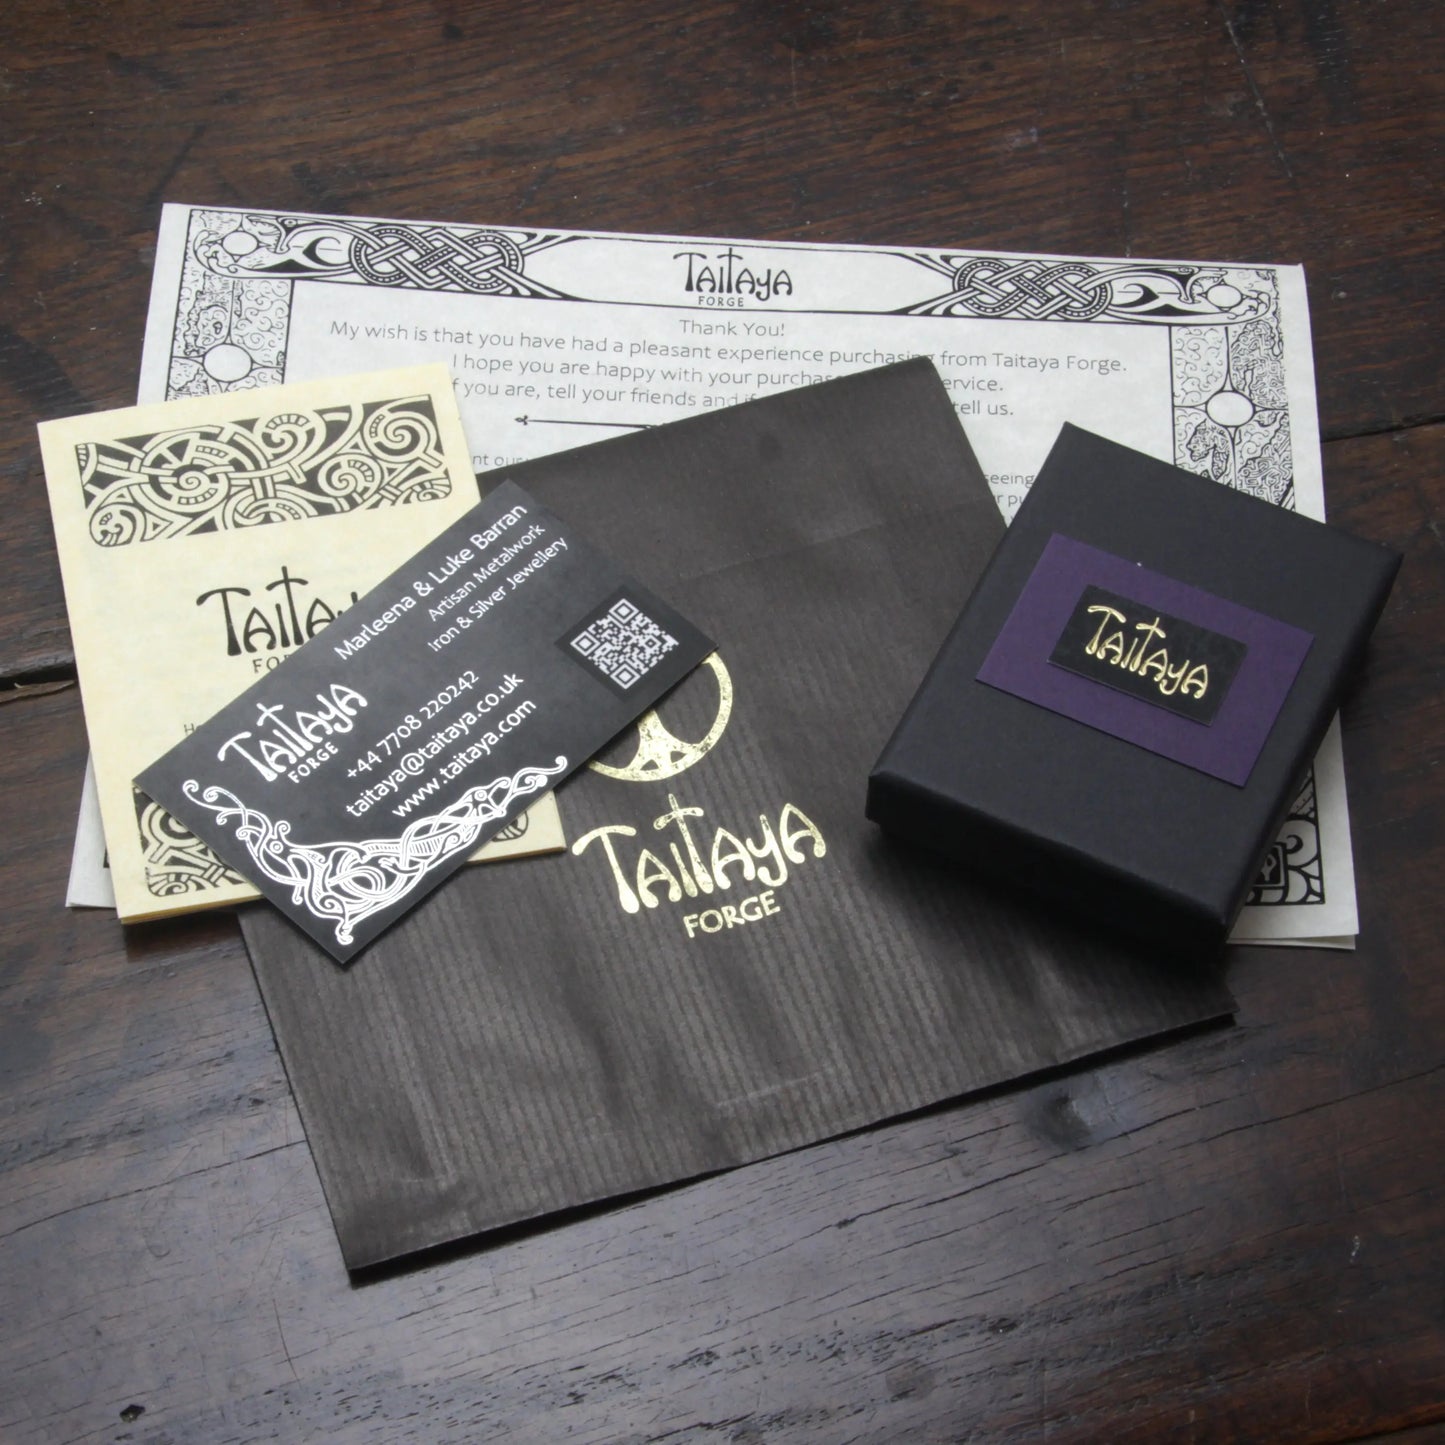 Example of our packaging that comes with the jewellery from Taitaya Forge. Includes a business card, care instruction and a recyclable gift box.